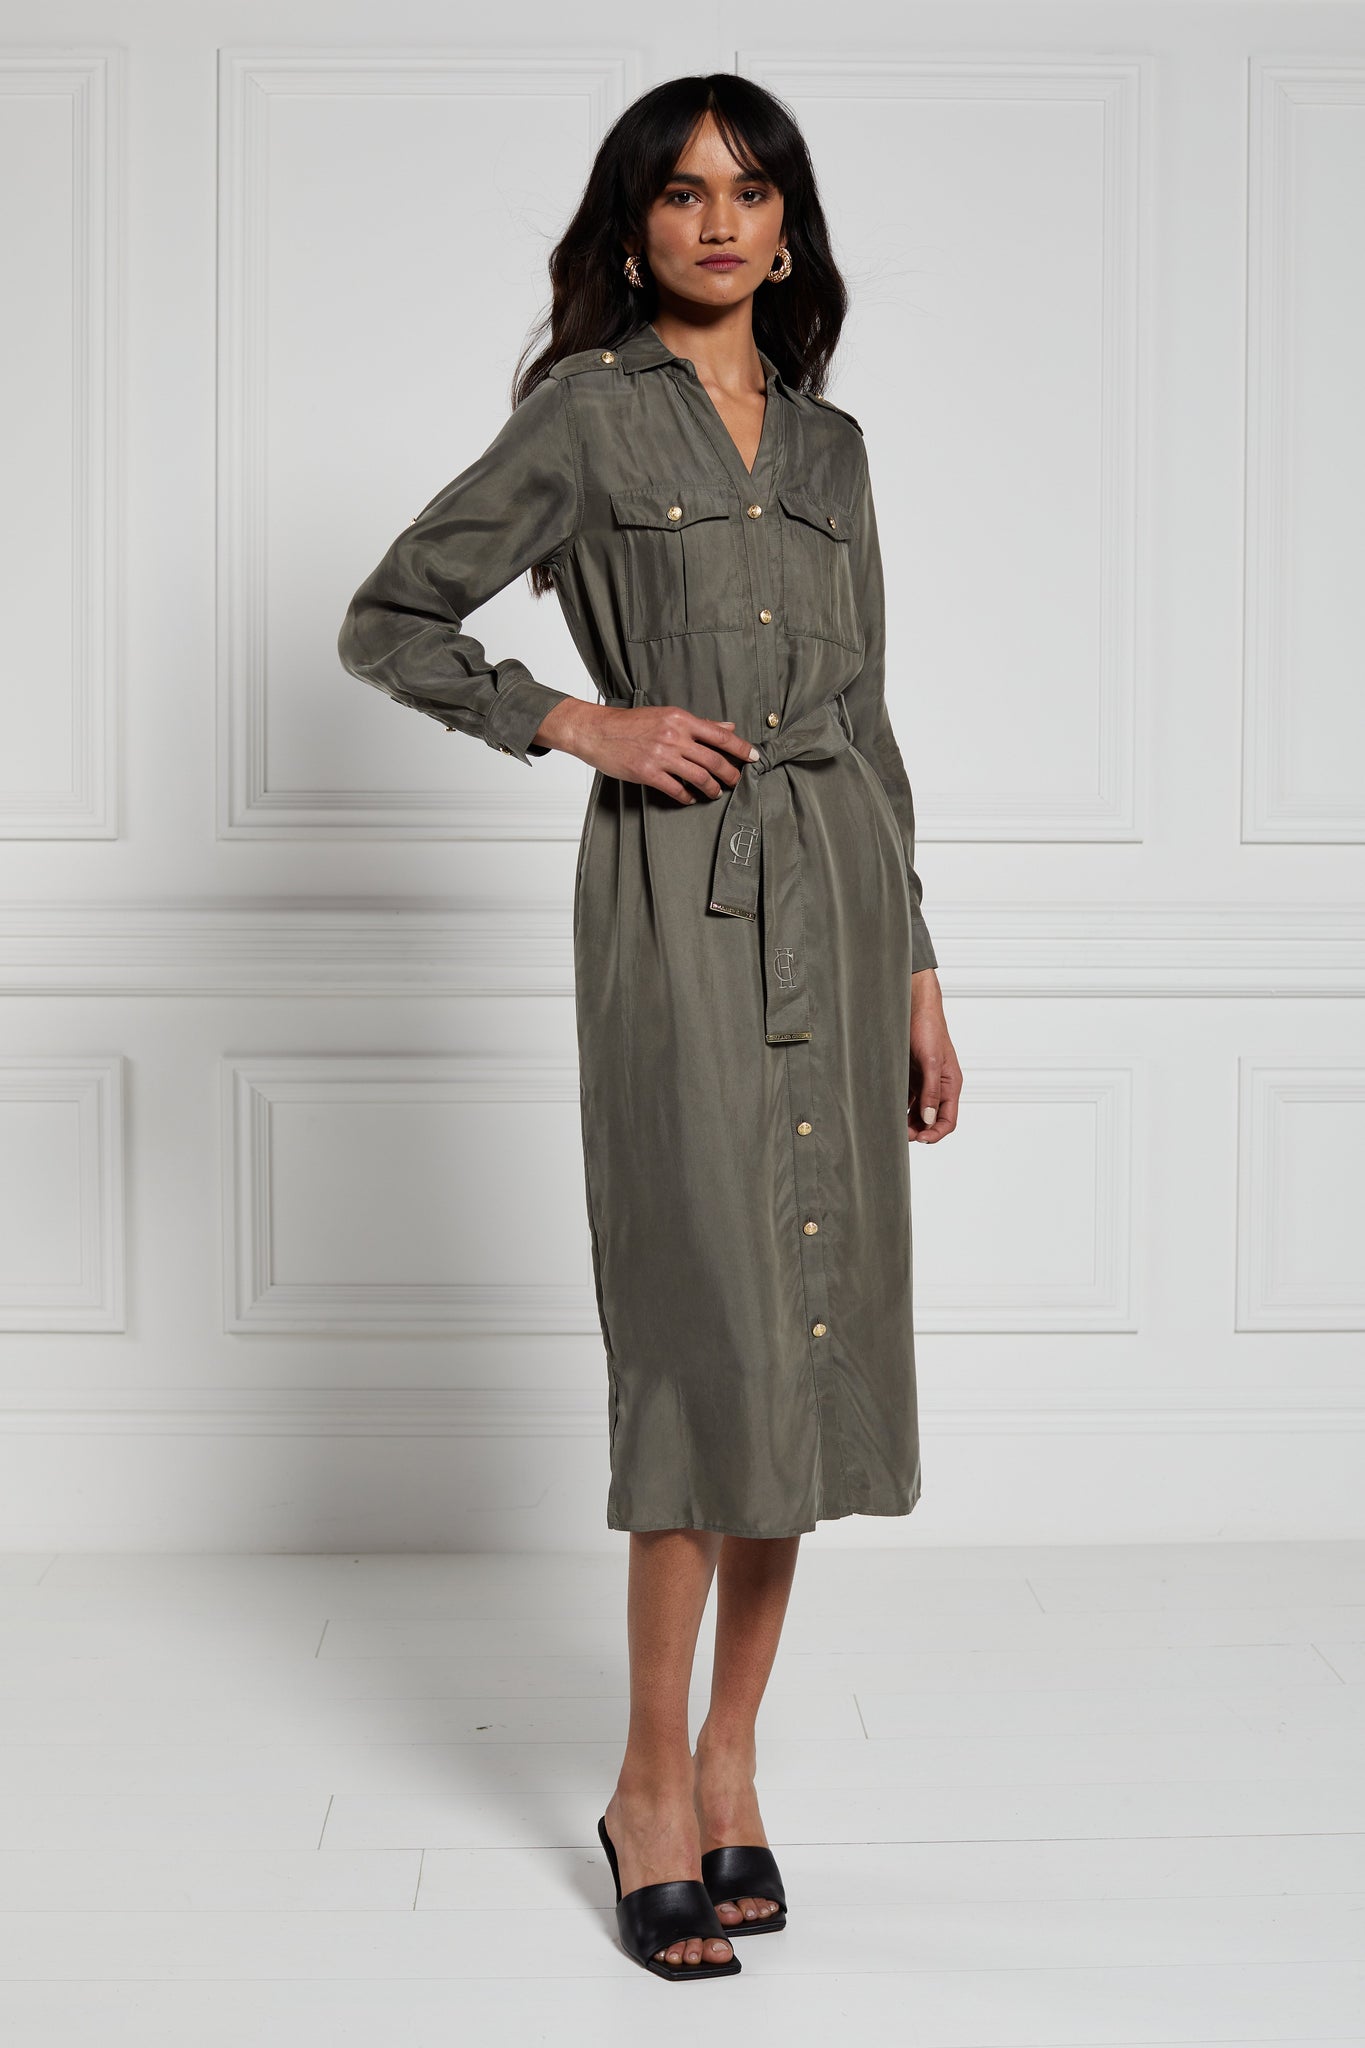 womens green military midi shirt dress with tie around waist and gold buttons down the front